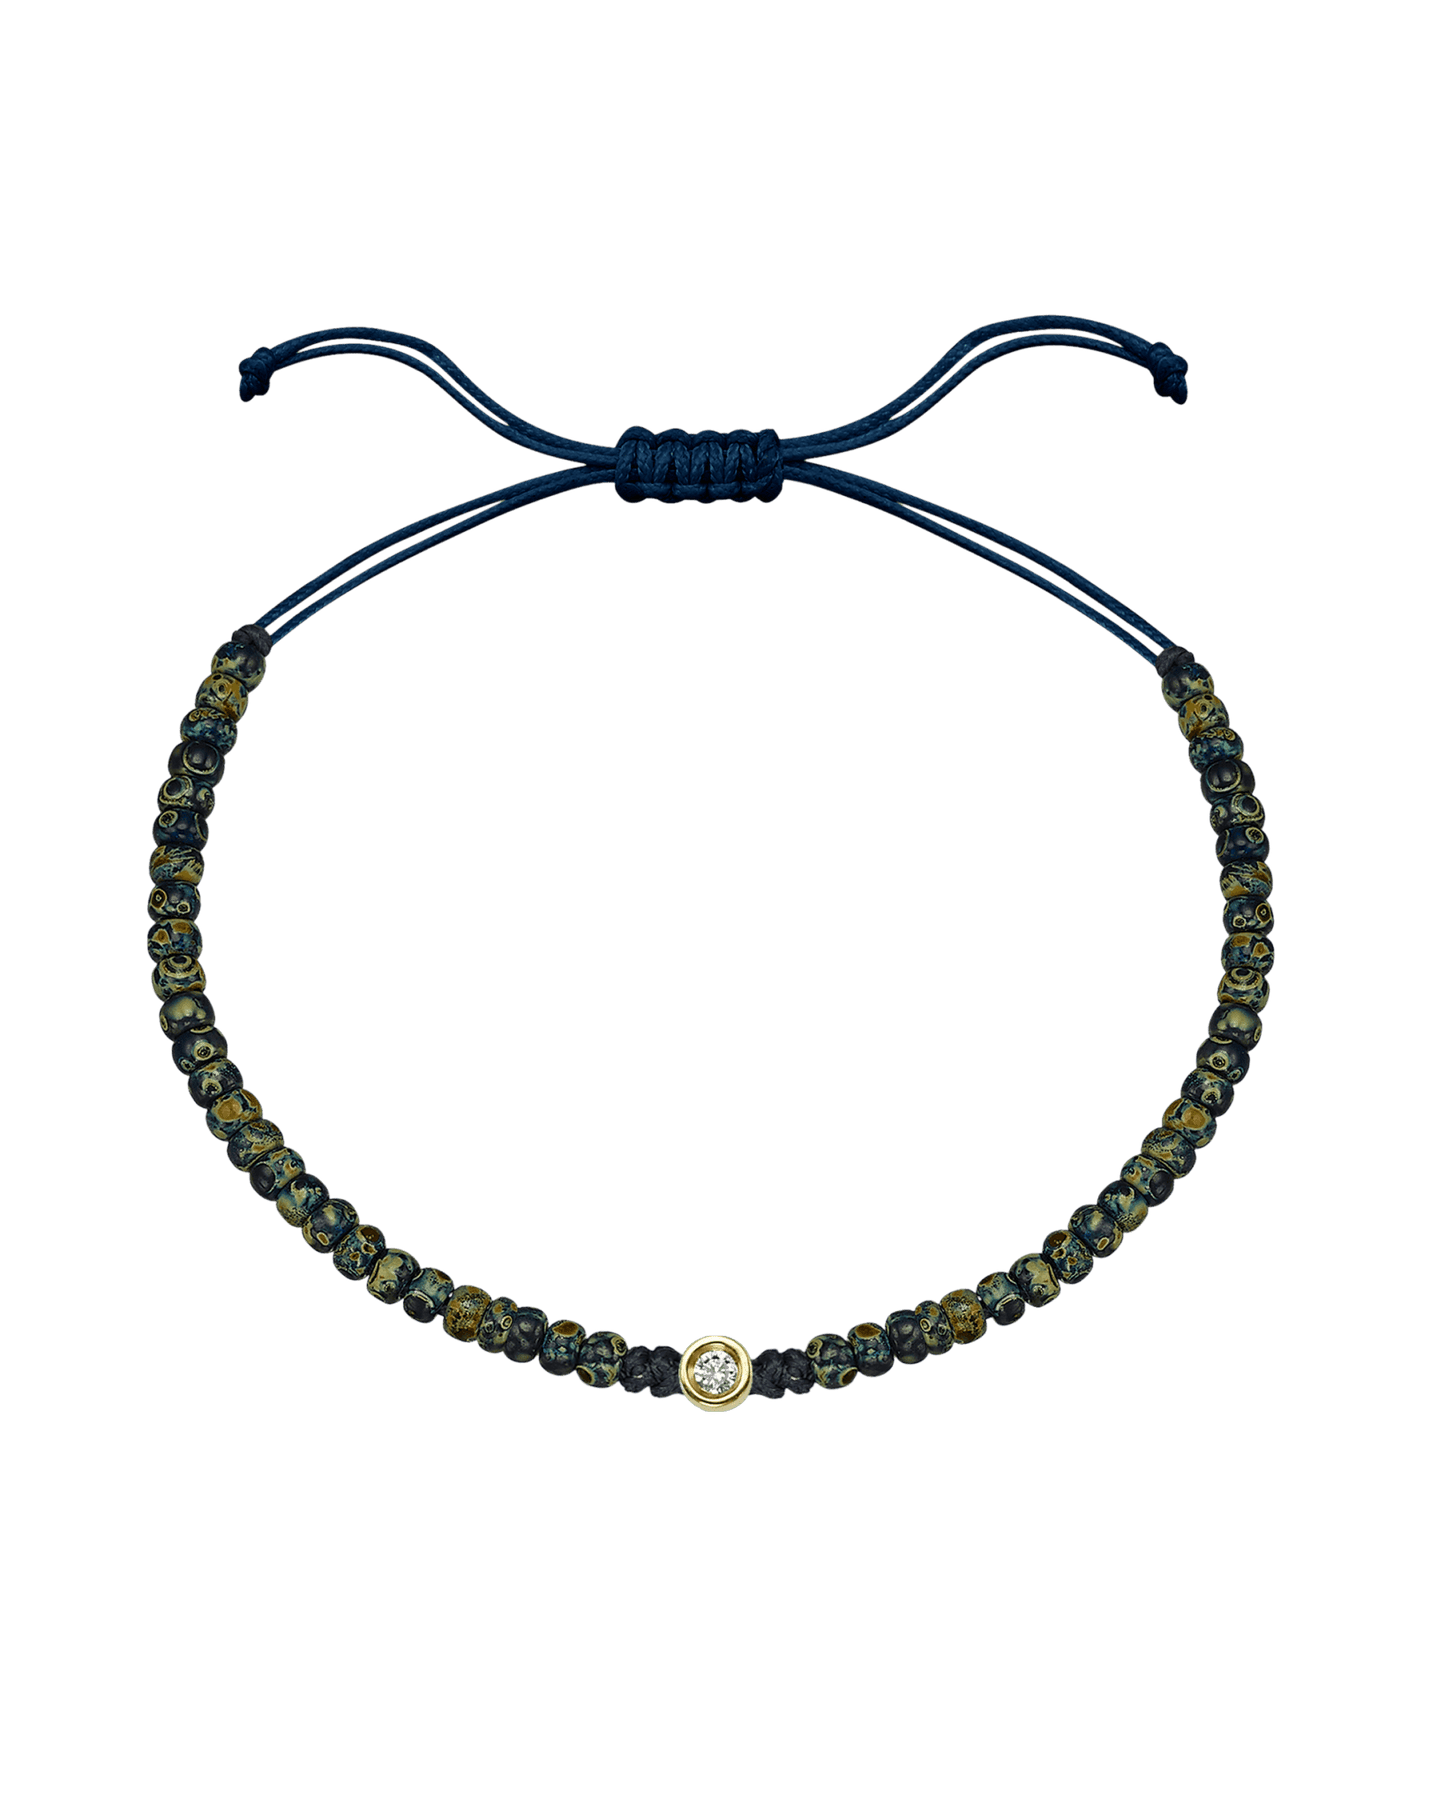 Dyed Blue Beads String Of Love - 14K Yellow Gold Bracelets magal-dev Small: 0.03ct 